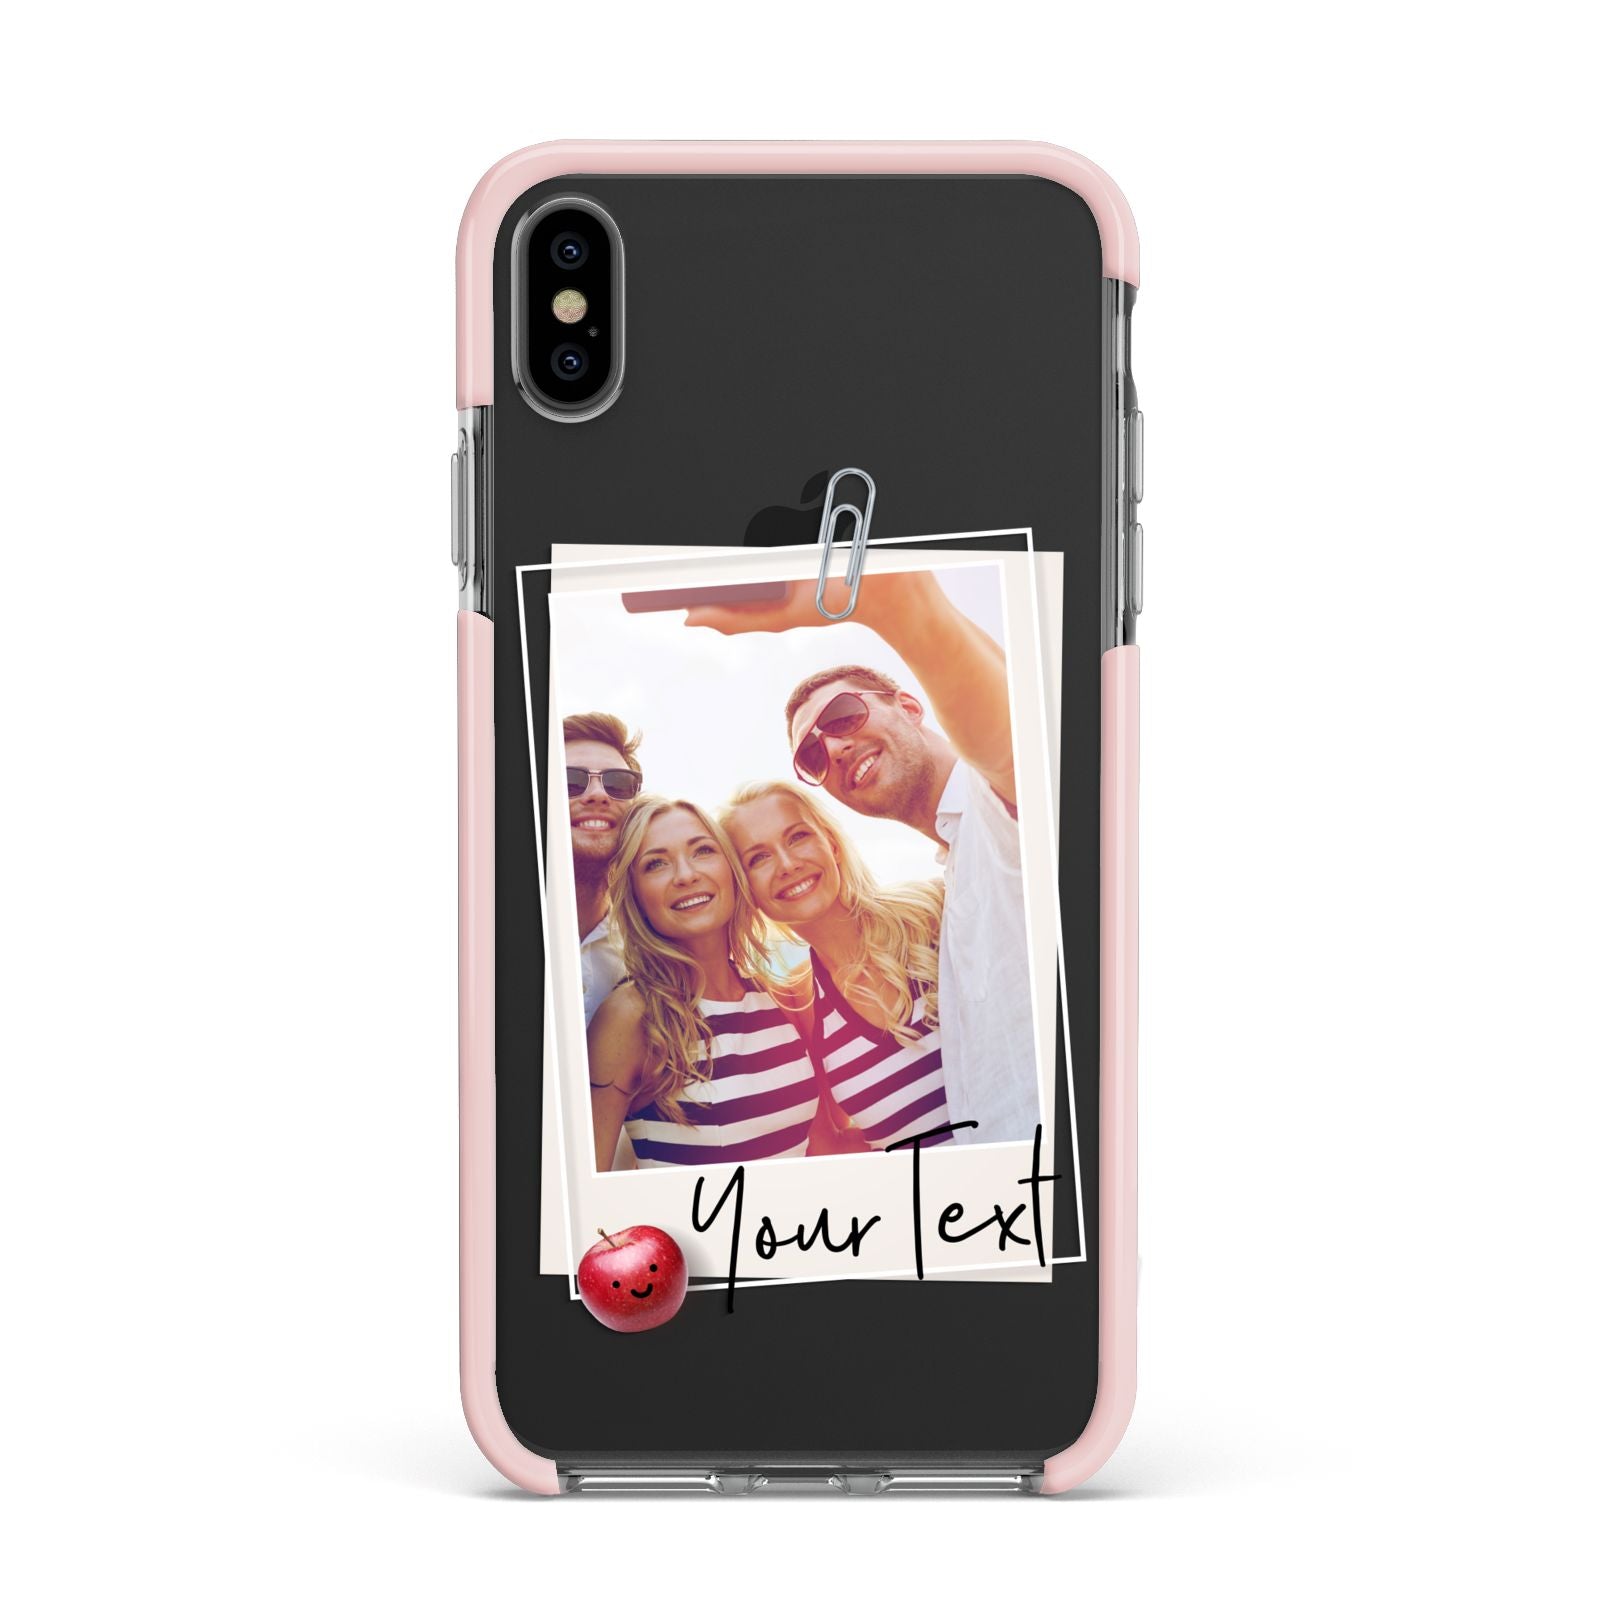 Photograph and Name Apple iPhone Xs Max Impact Case Pink Edge on Black Phone